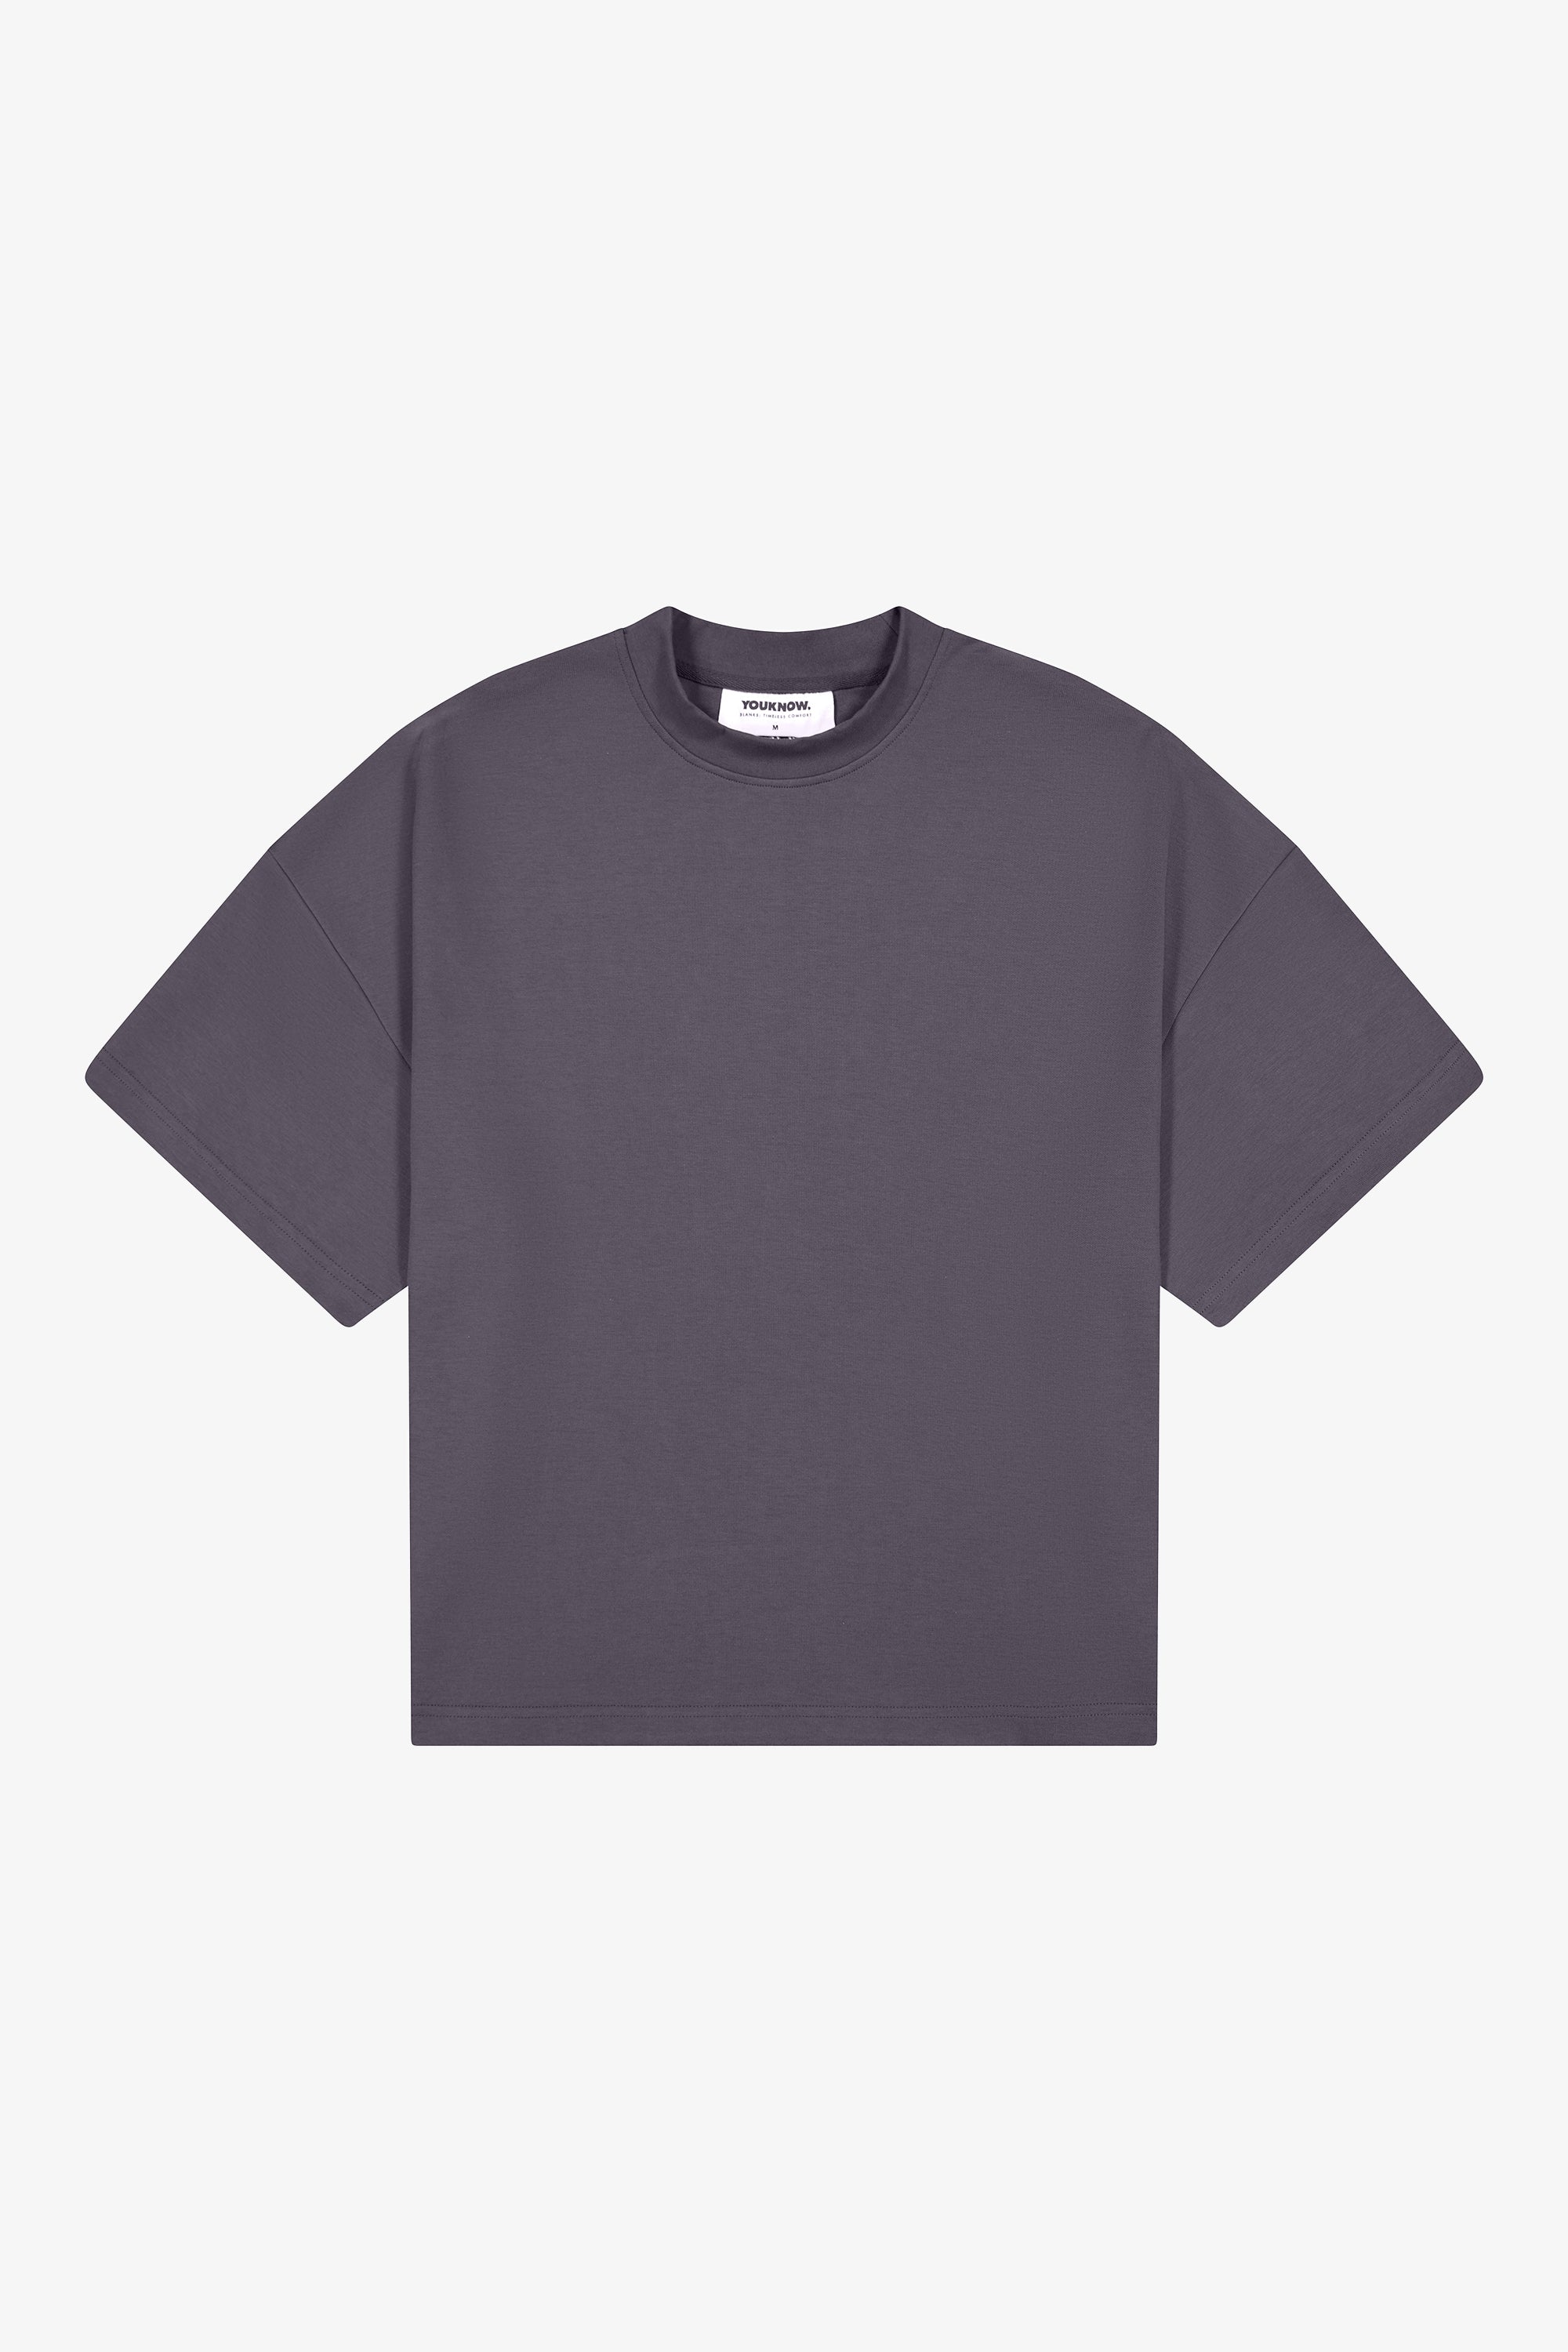 Fit finder image NOTHING TEE | CONCRETE